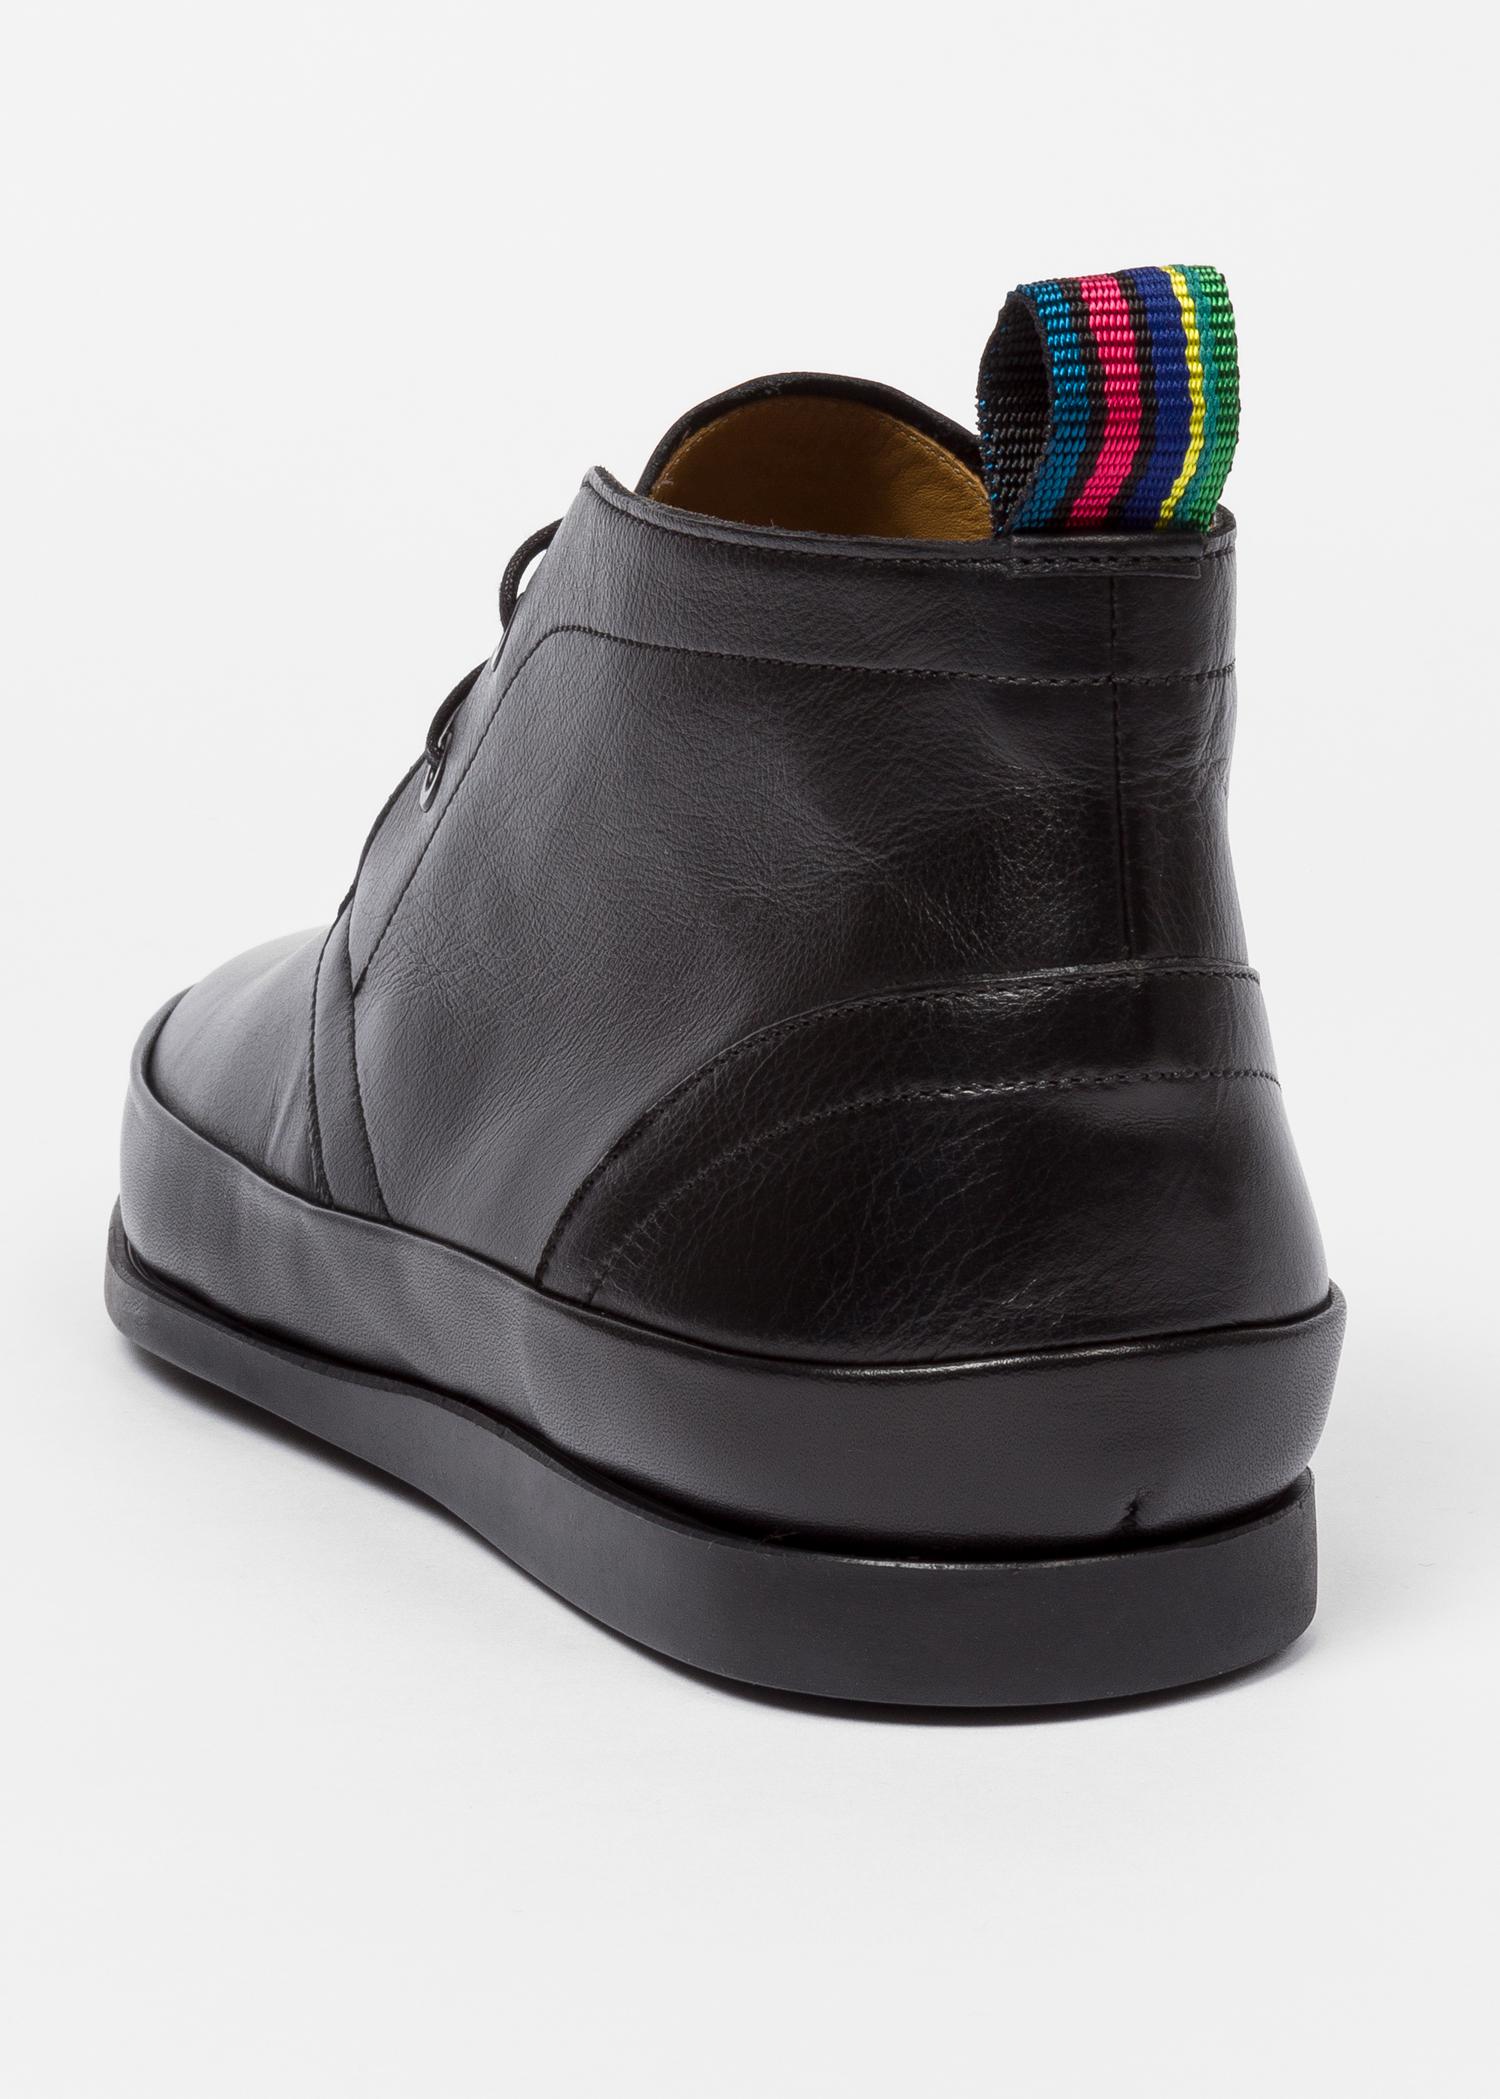 paul smith cleon boots black